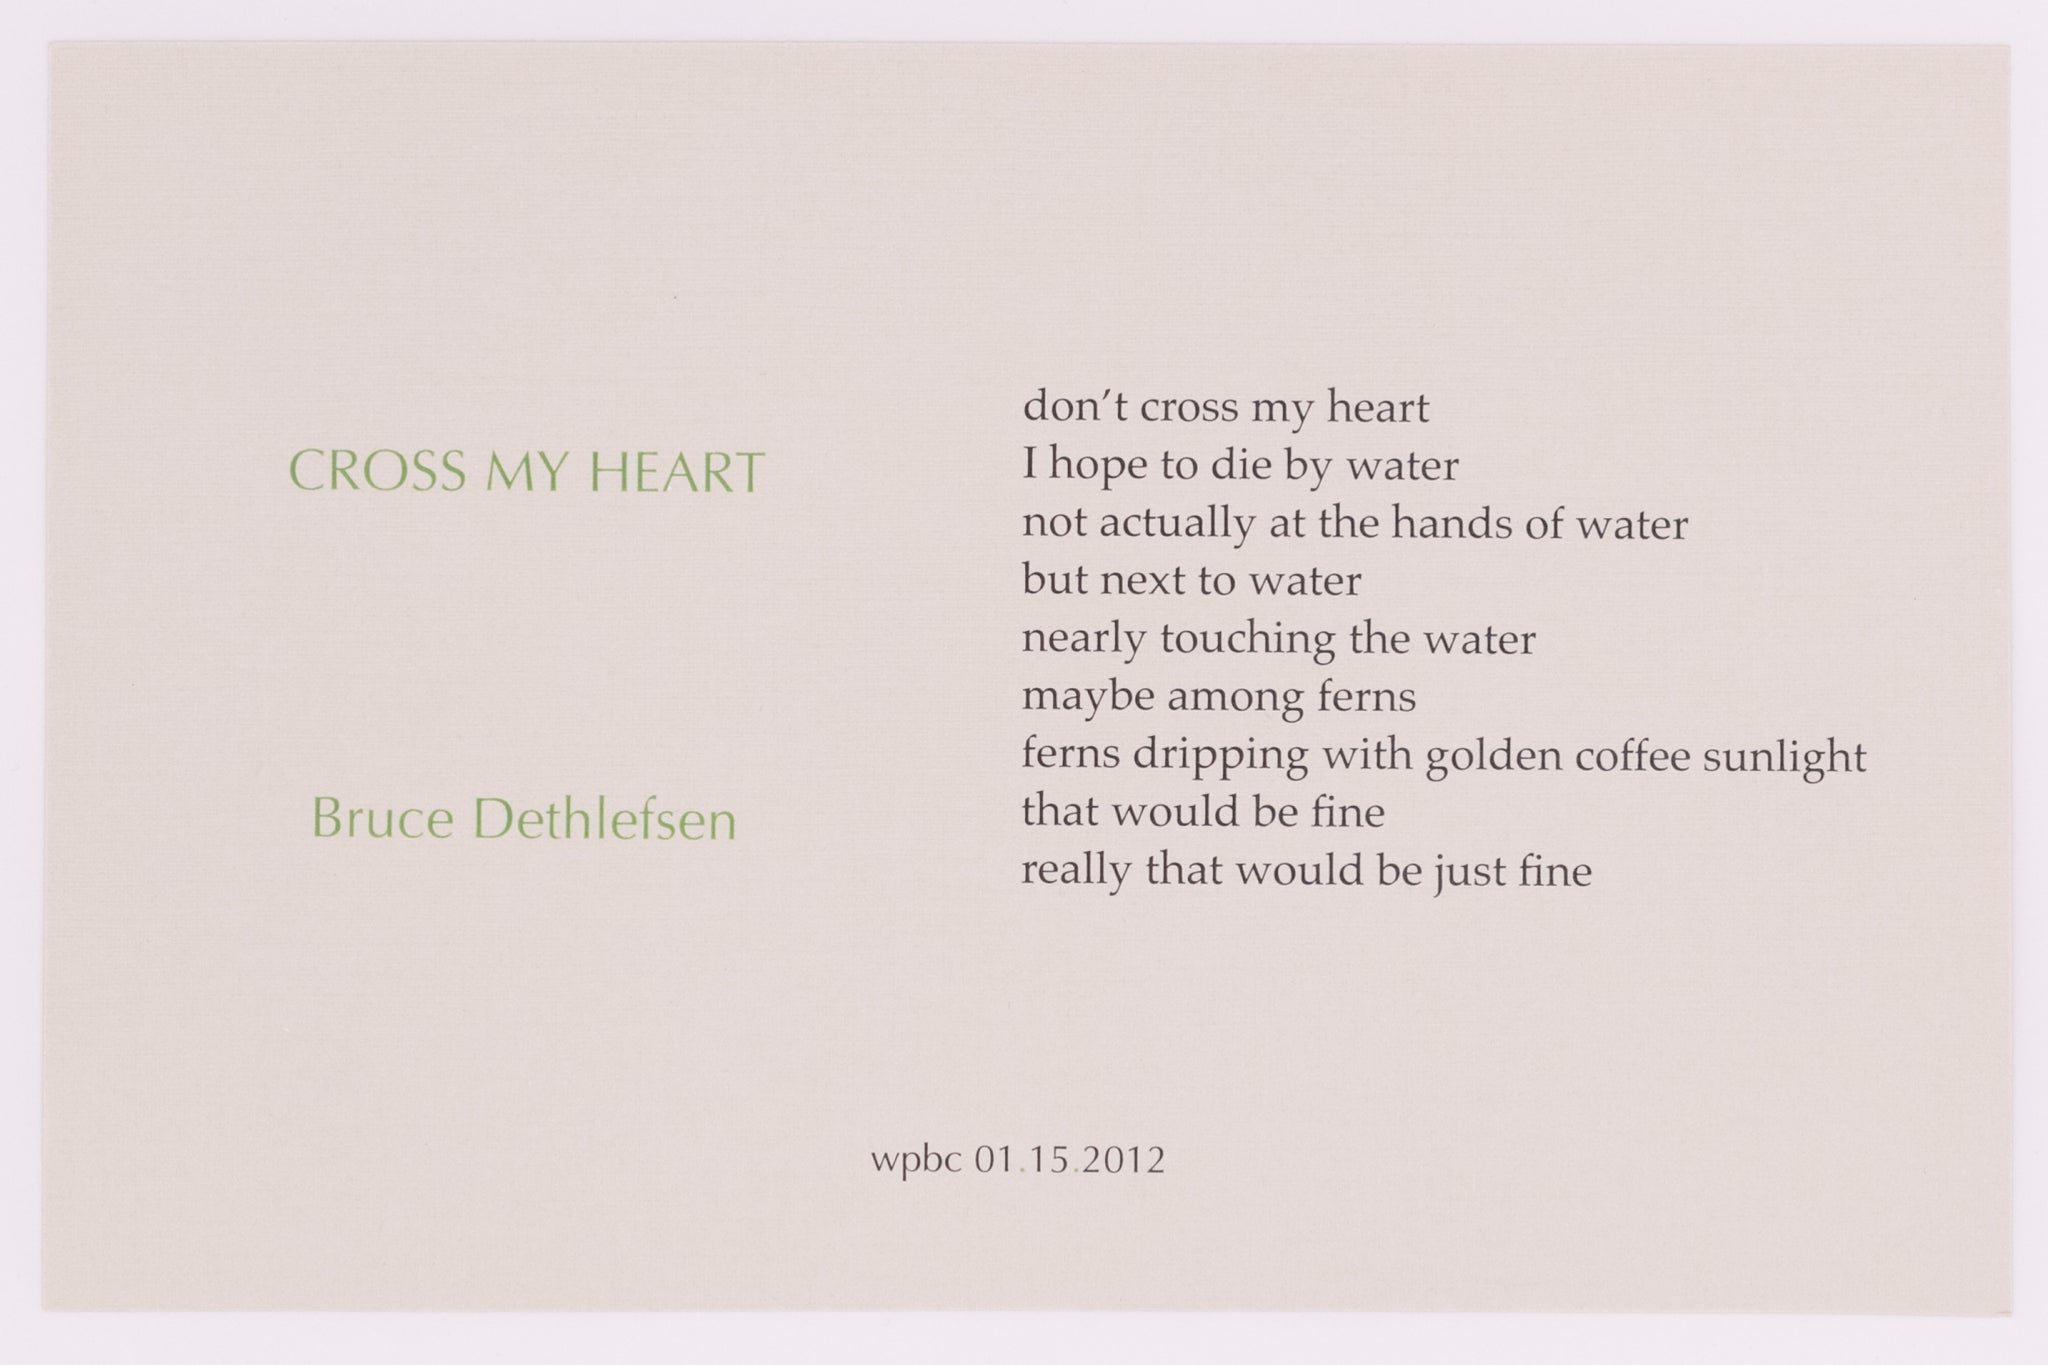 Broadside titled Cross my Heart by Bruce Dethlefsen. Green and black text on grey paper.